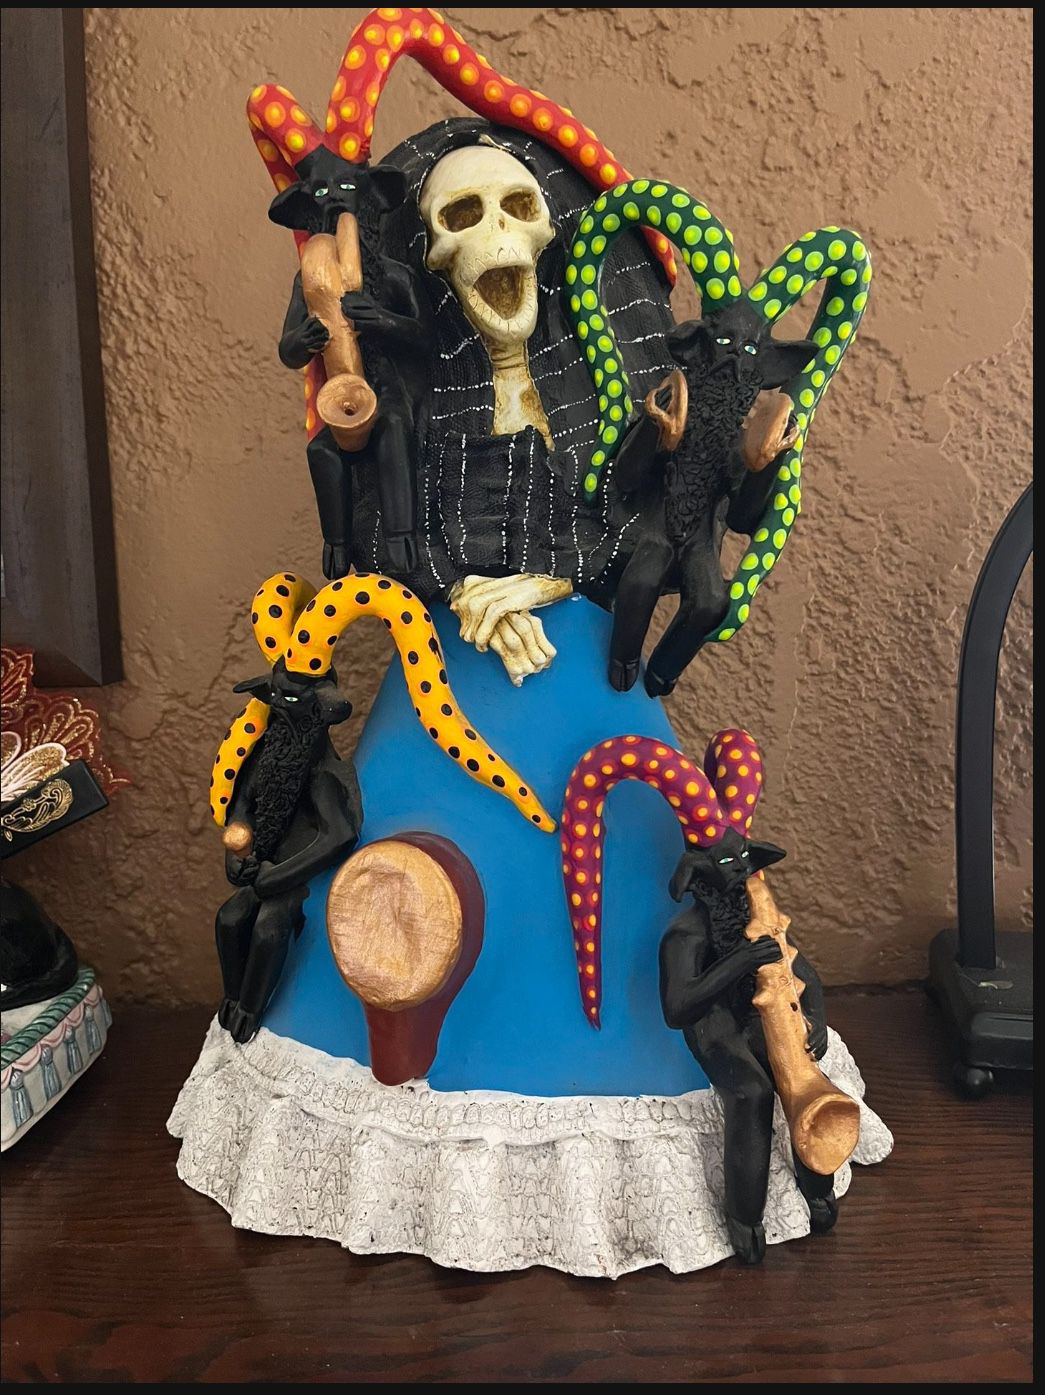 Signed Day Of The Dead Sculpture “Concepcion”$30